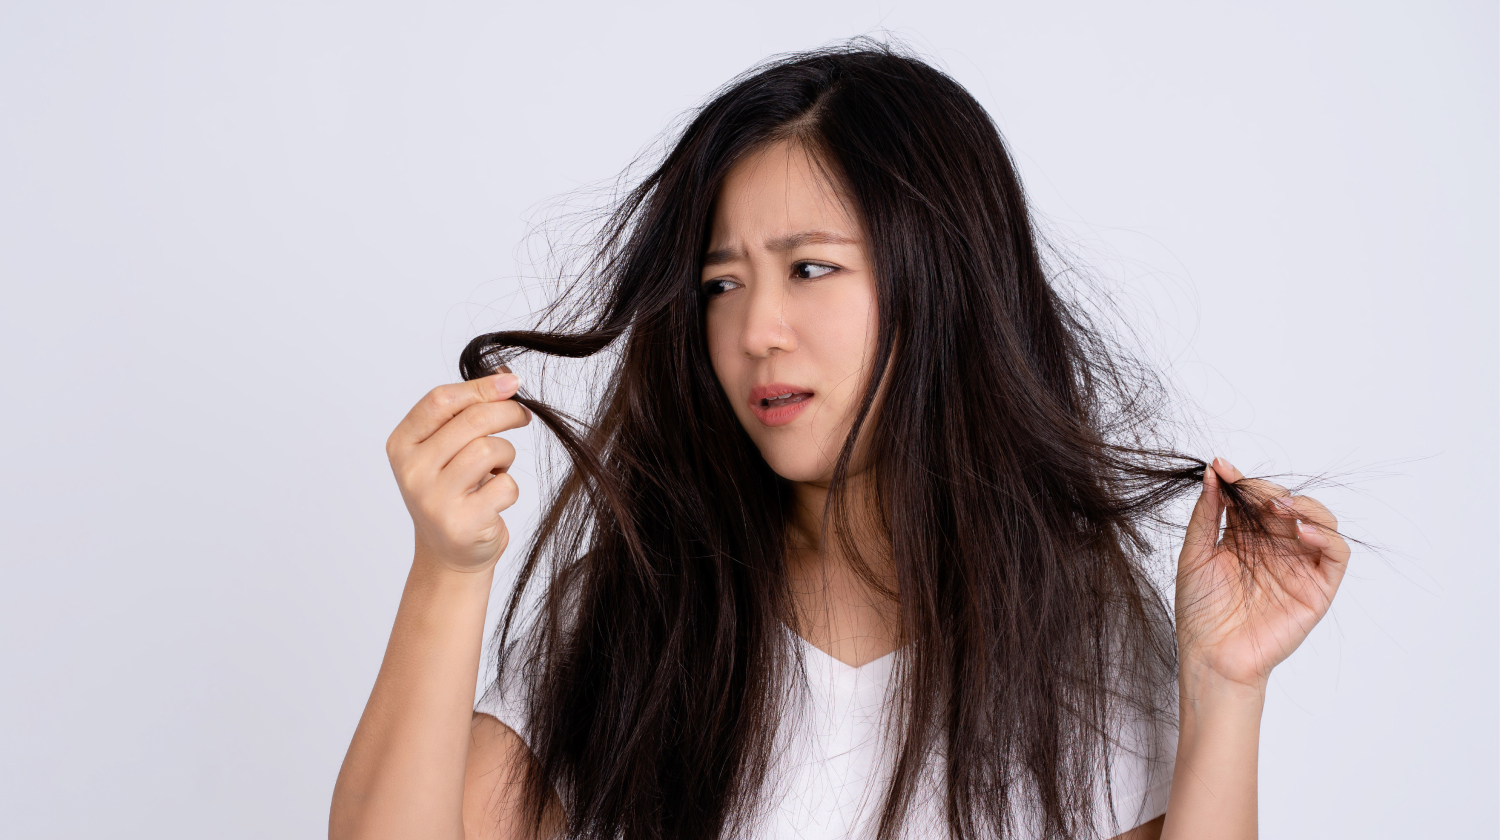 How To Get Rid Of Static In Hair: 6 Effective Ways To Follow 2023